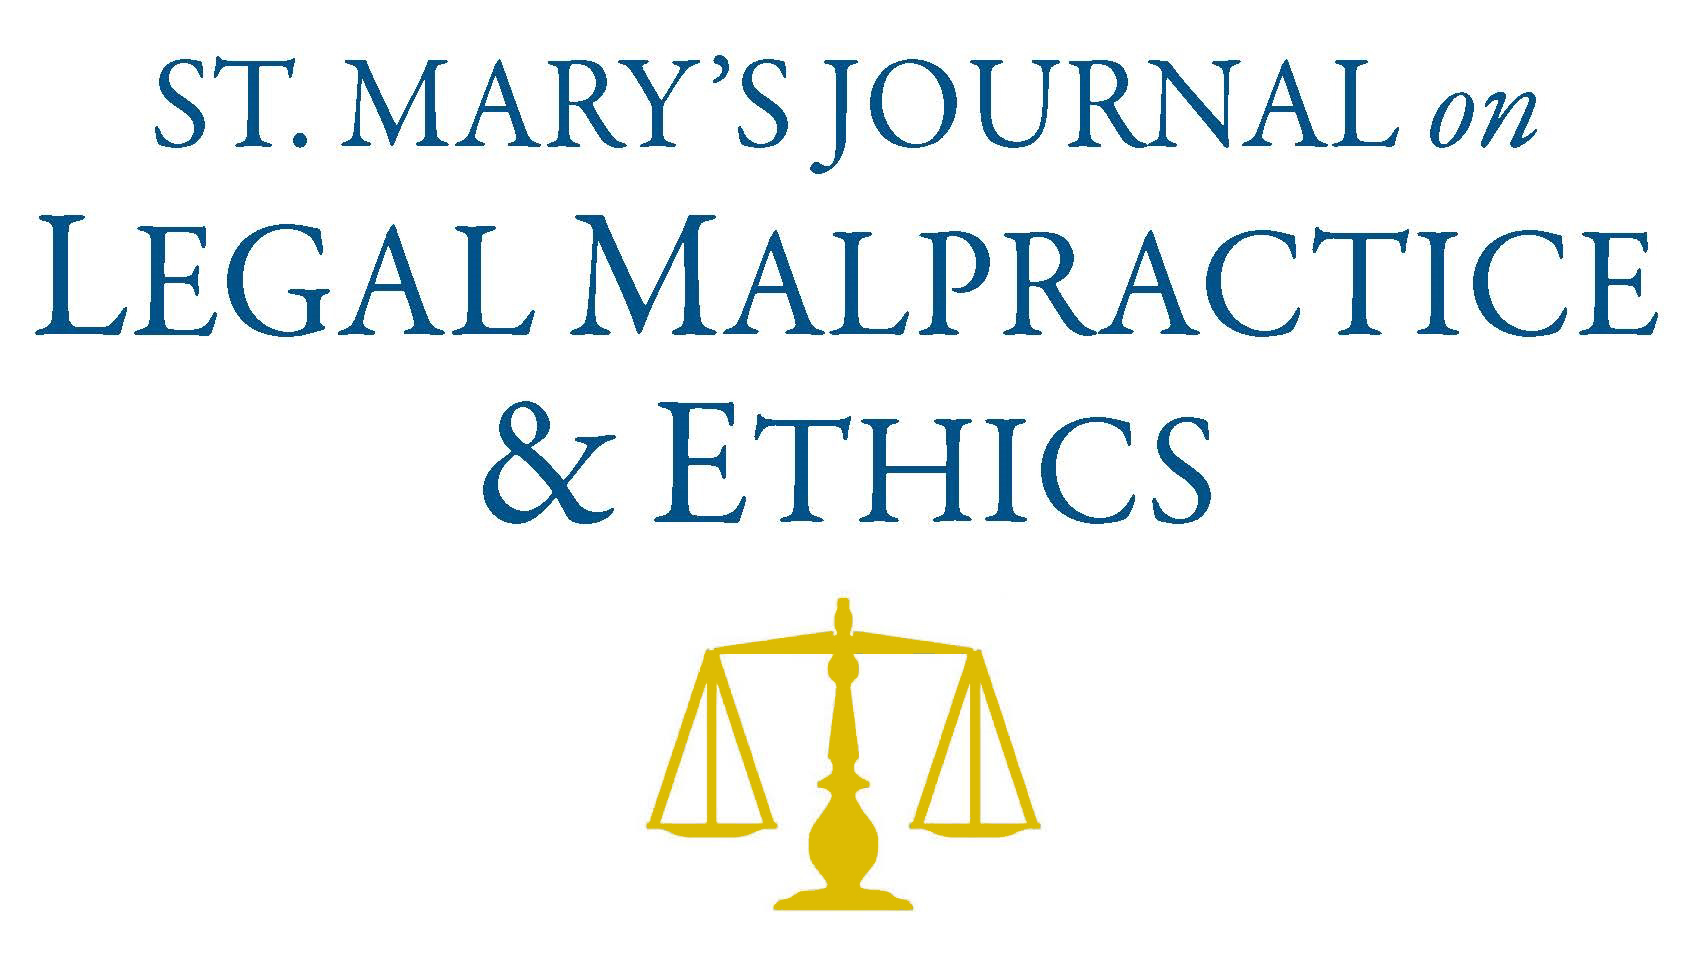 St. Mary's Journal on Legal Malpractice & Ethics